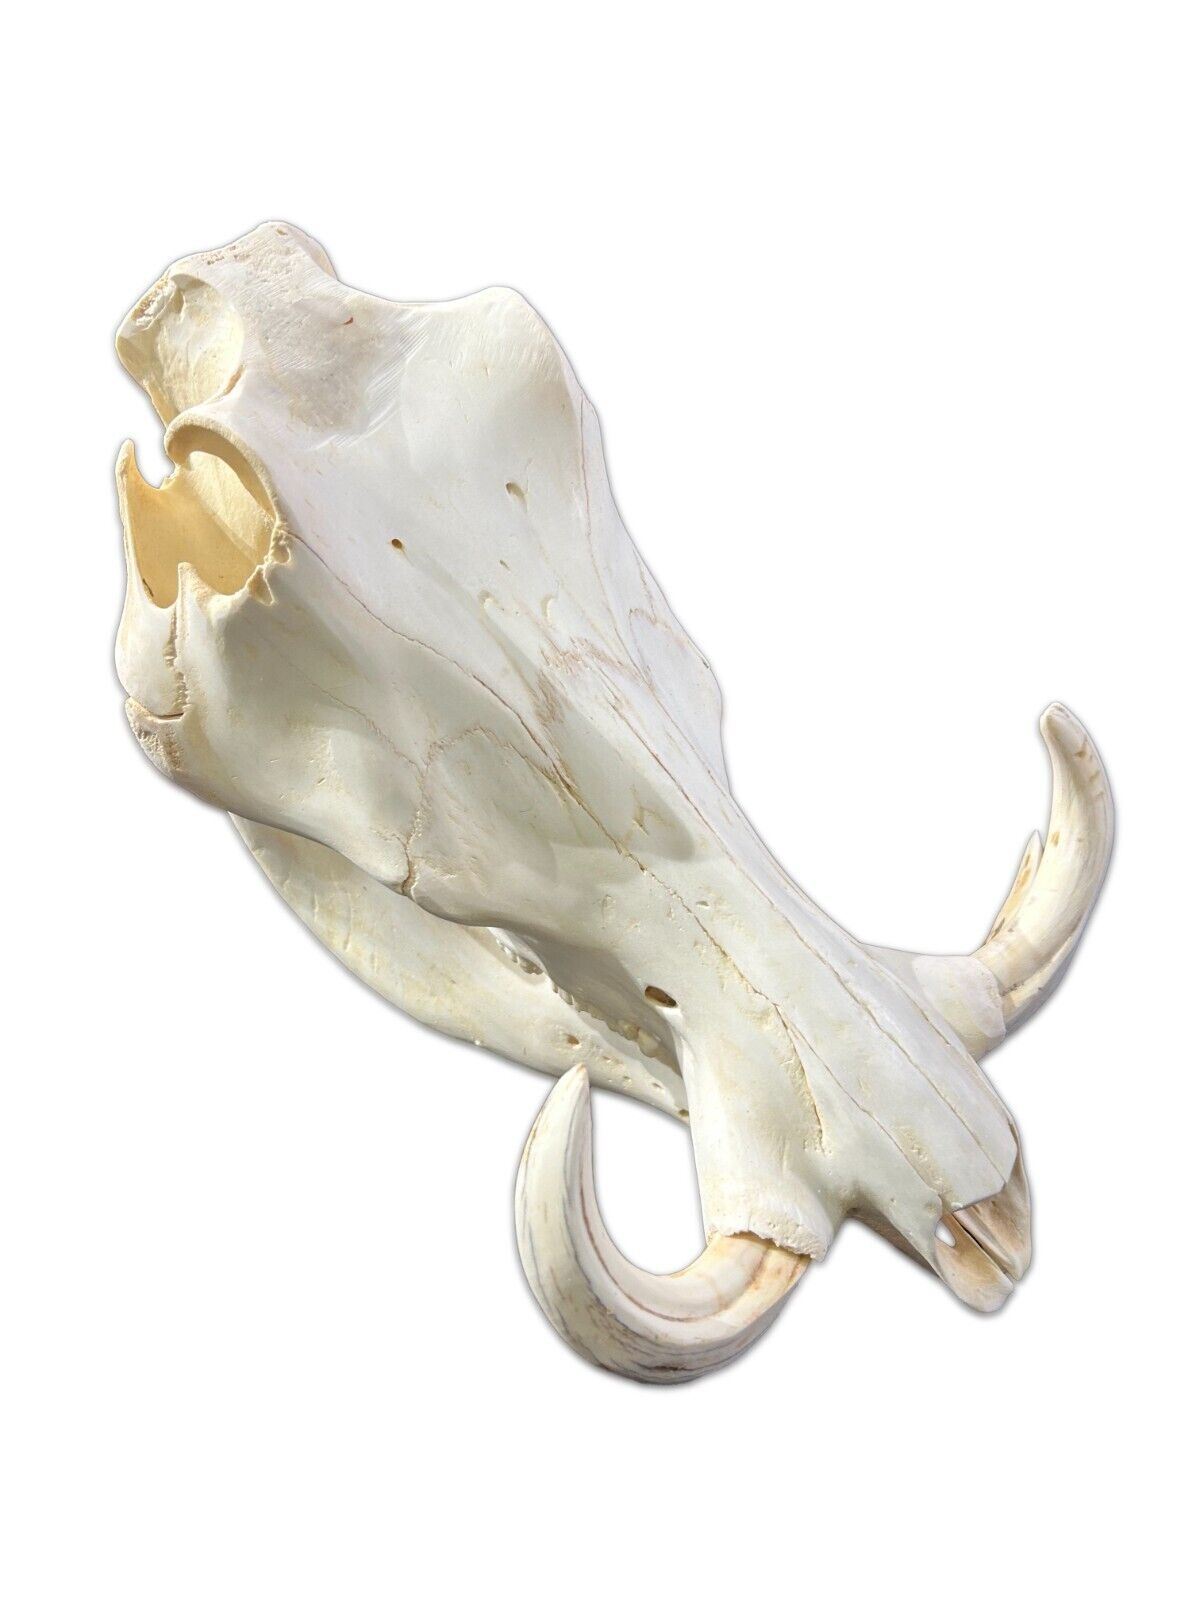 African Pig Skull - Real Wild Pig Natural Cranium Approximate Size: 15x9.5x8.5"